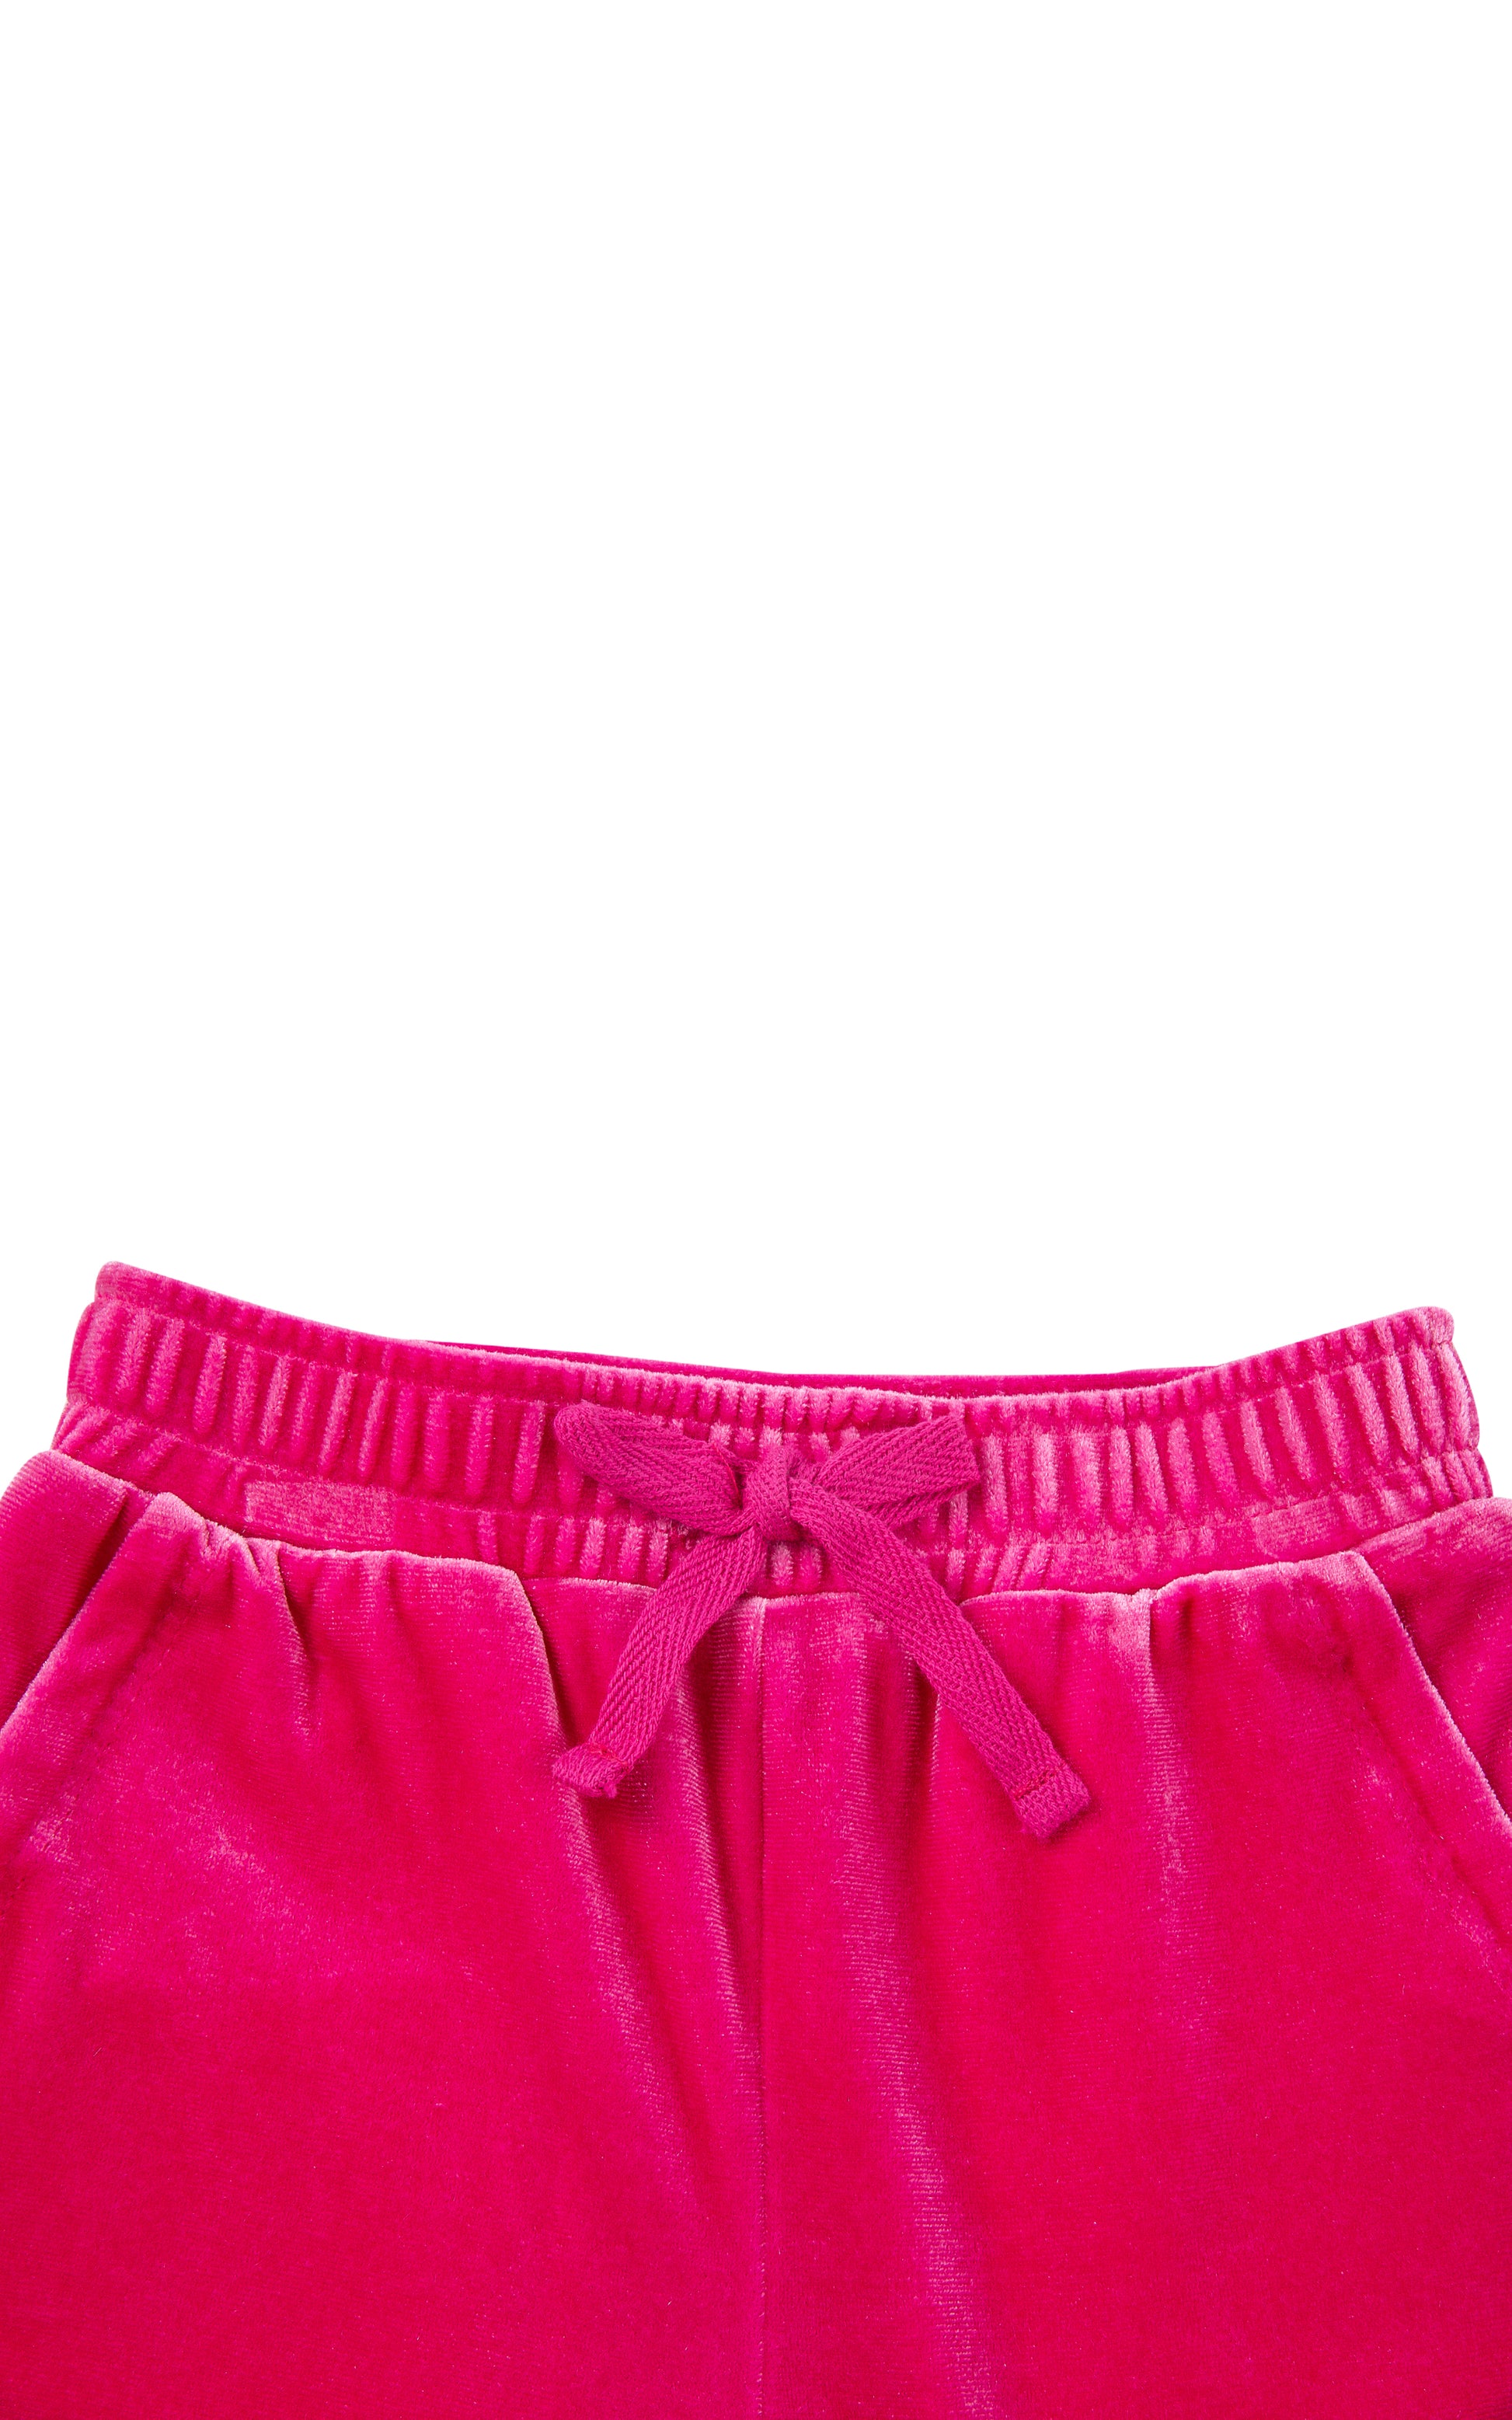 Detail view of a hot pink velour tracksuit jogger